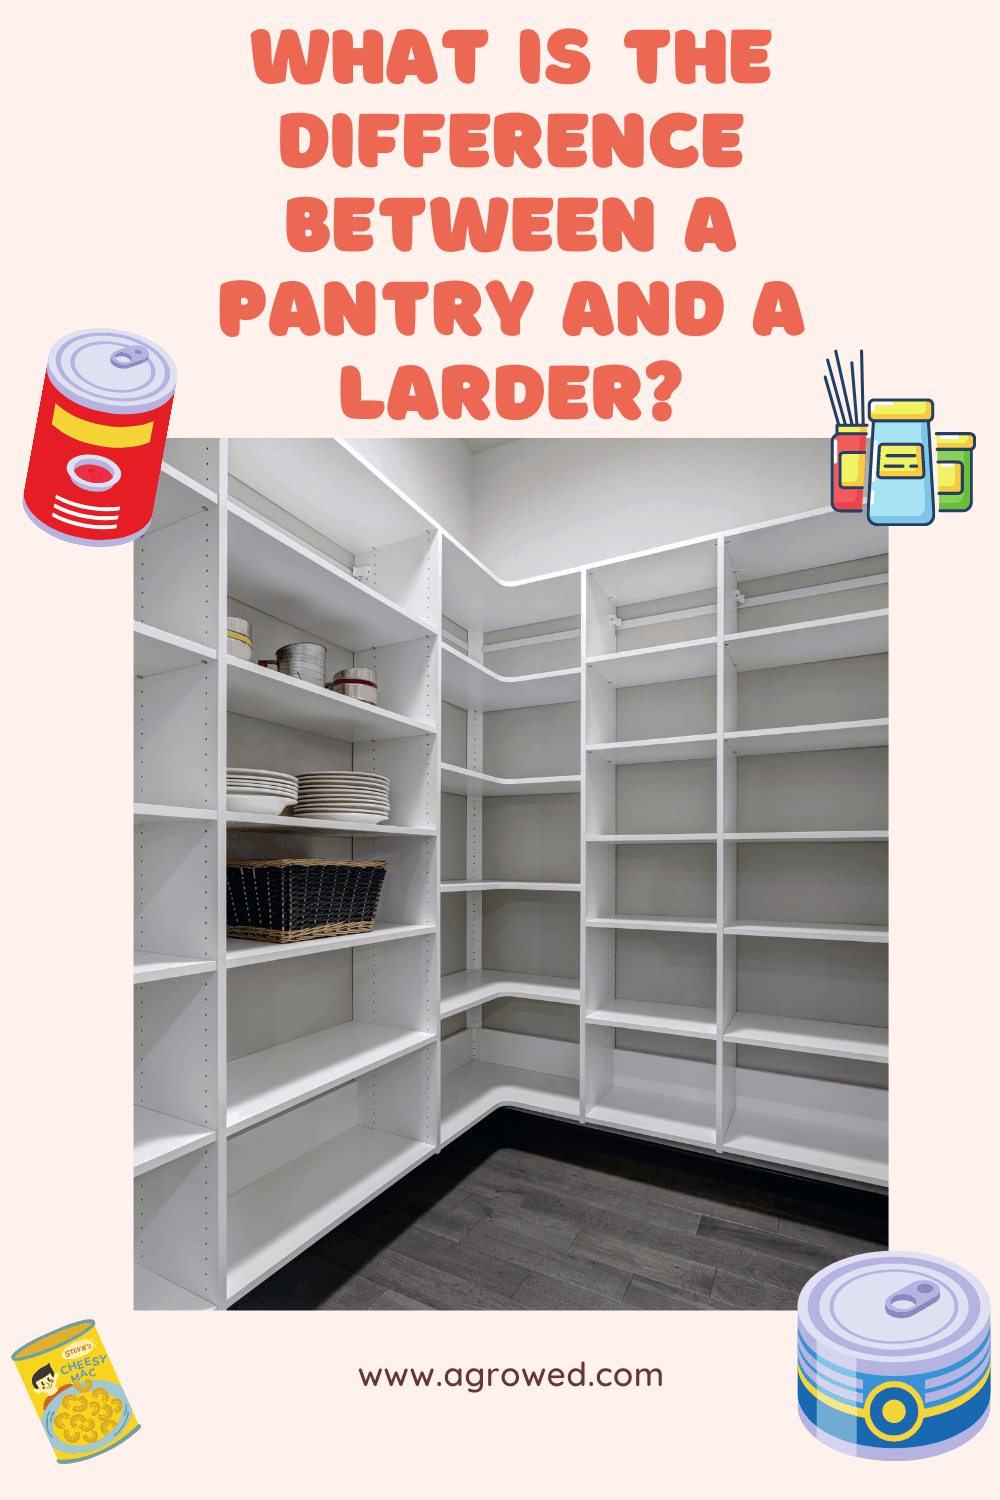 What Is the Difference Between a Pantry and A Larder